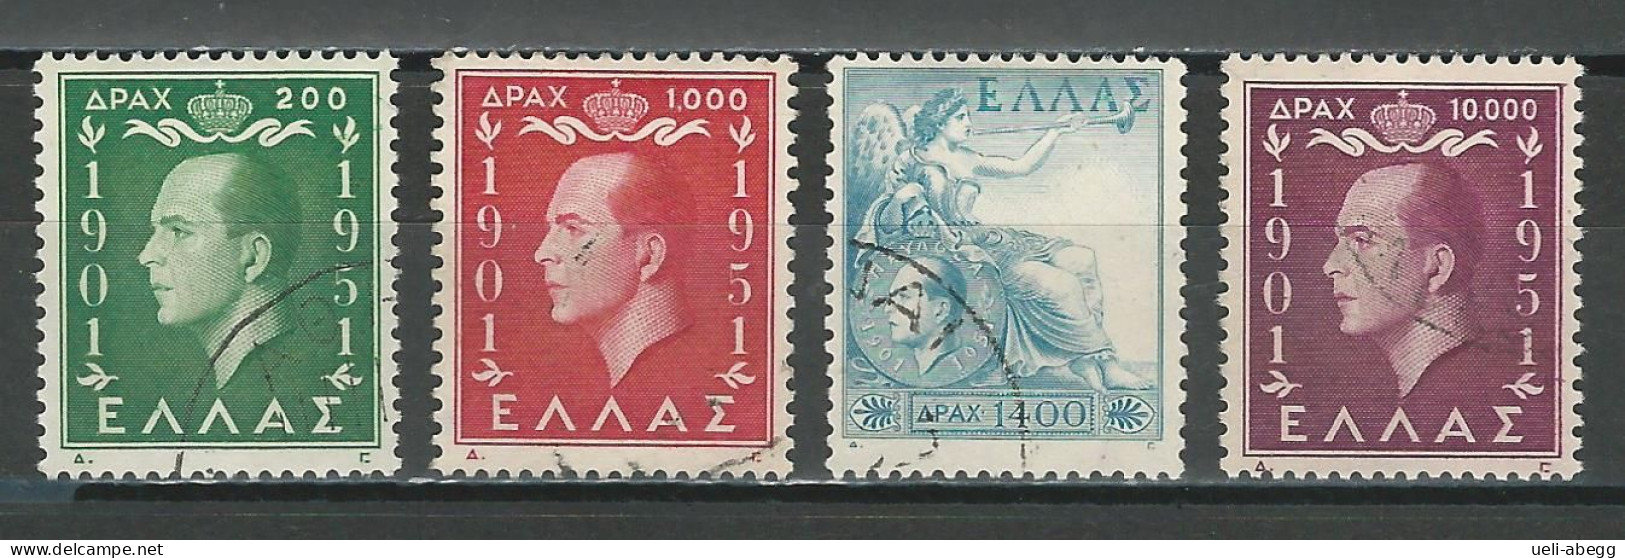 Griechenland Mi 592-95  O - Used Stamps